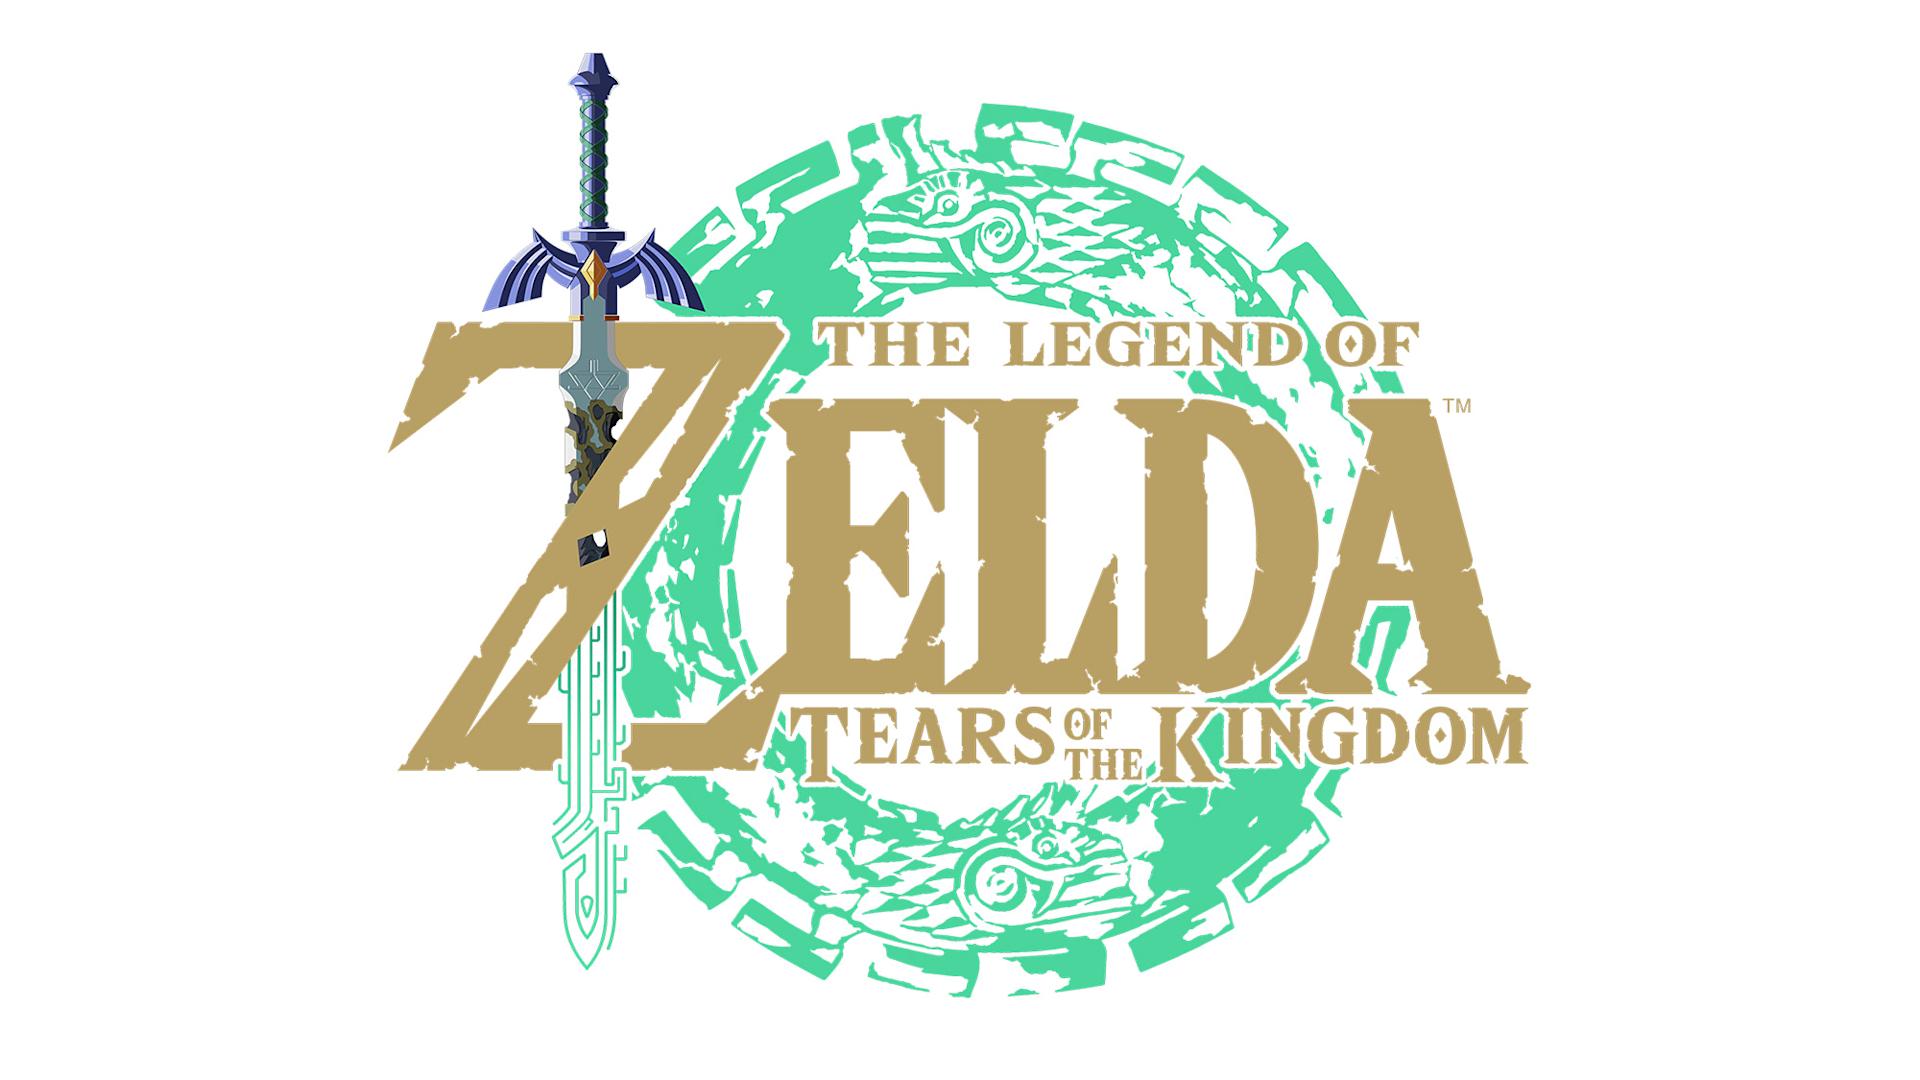 Nintendo Switch – OLED Model The Legend of Zelda: Tears of the Kingdom Edition and Accessories